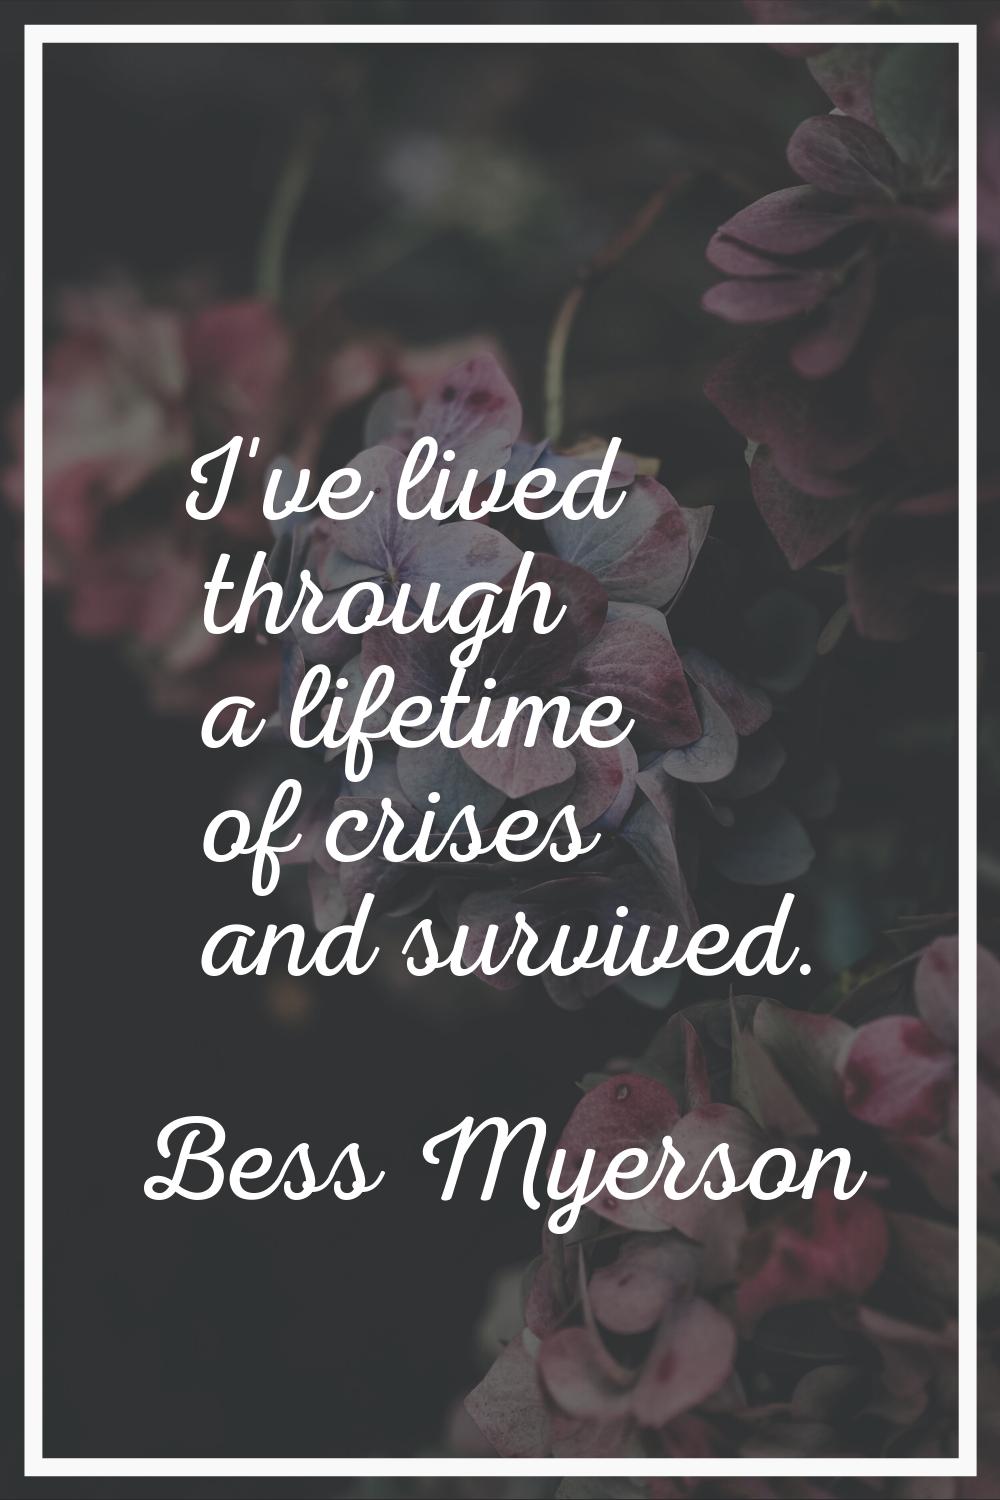 I've lived through a lifetime of crises and survived.